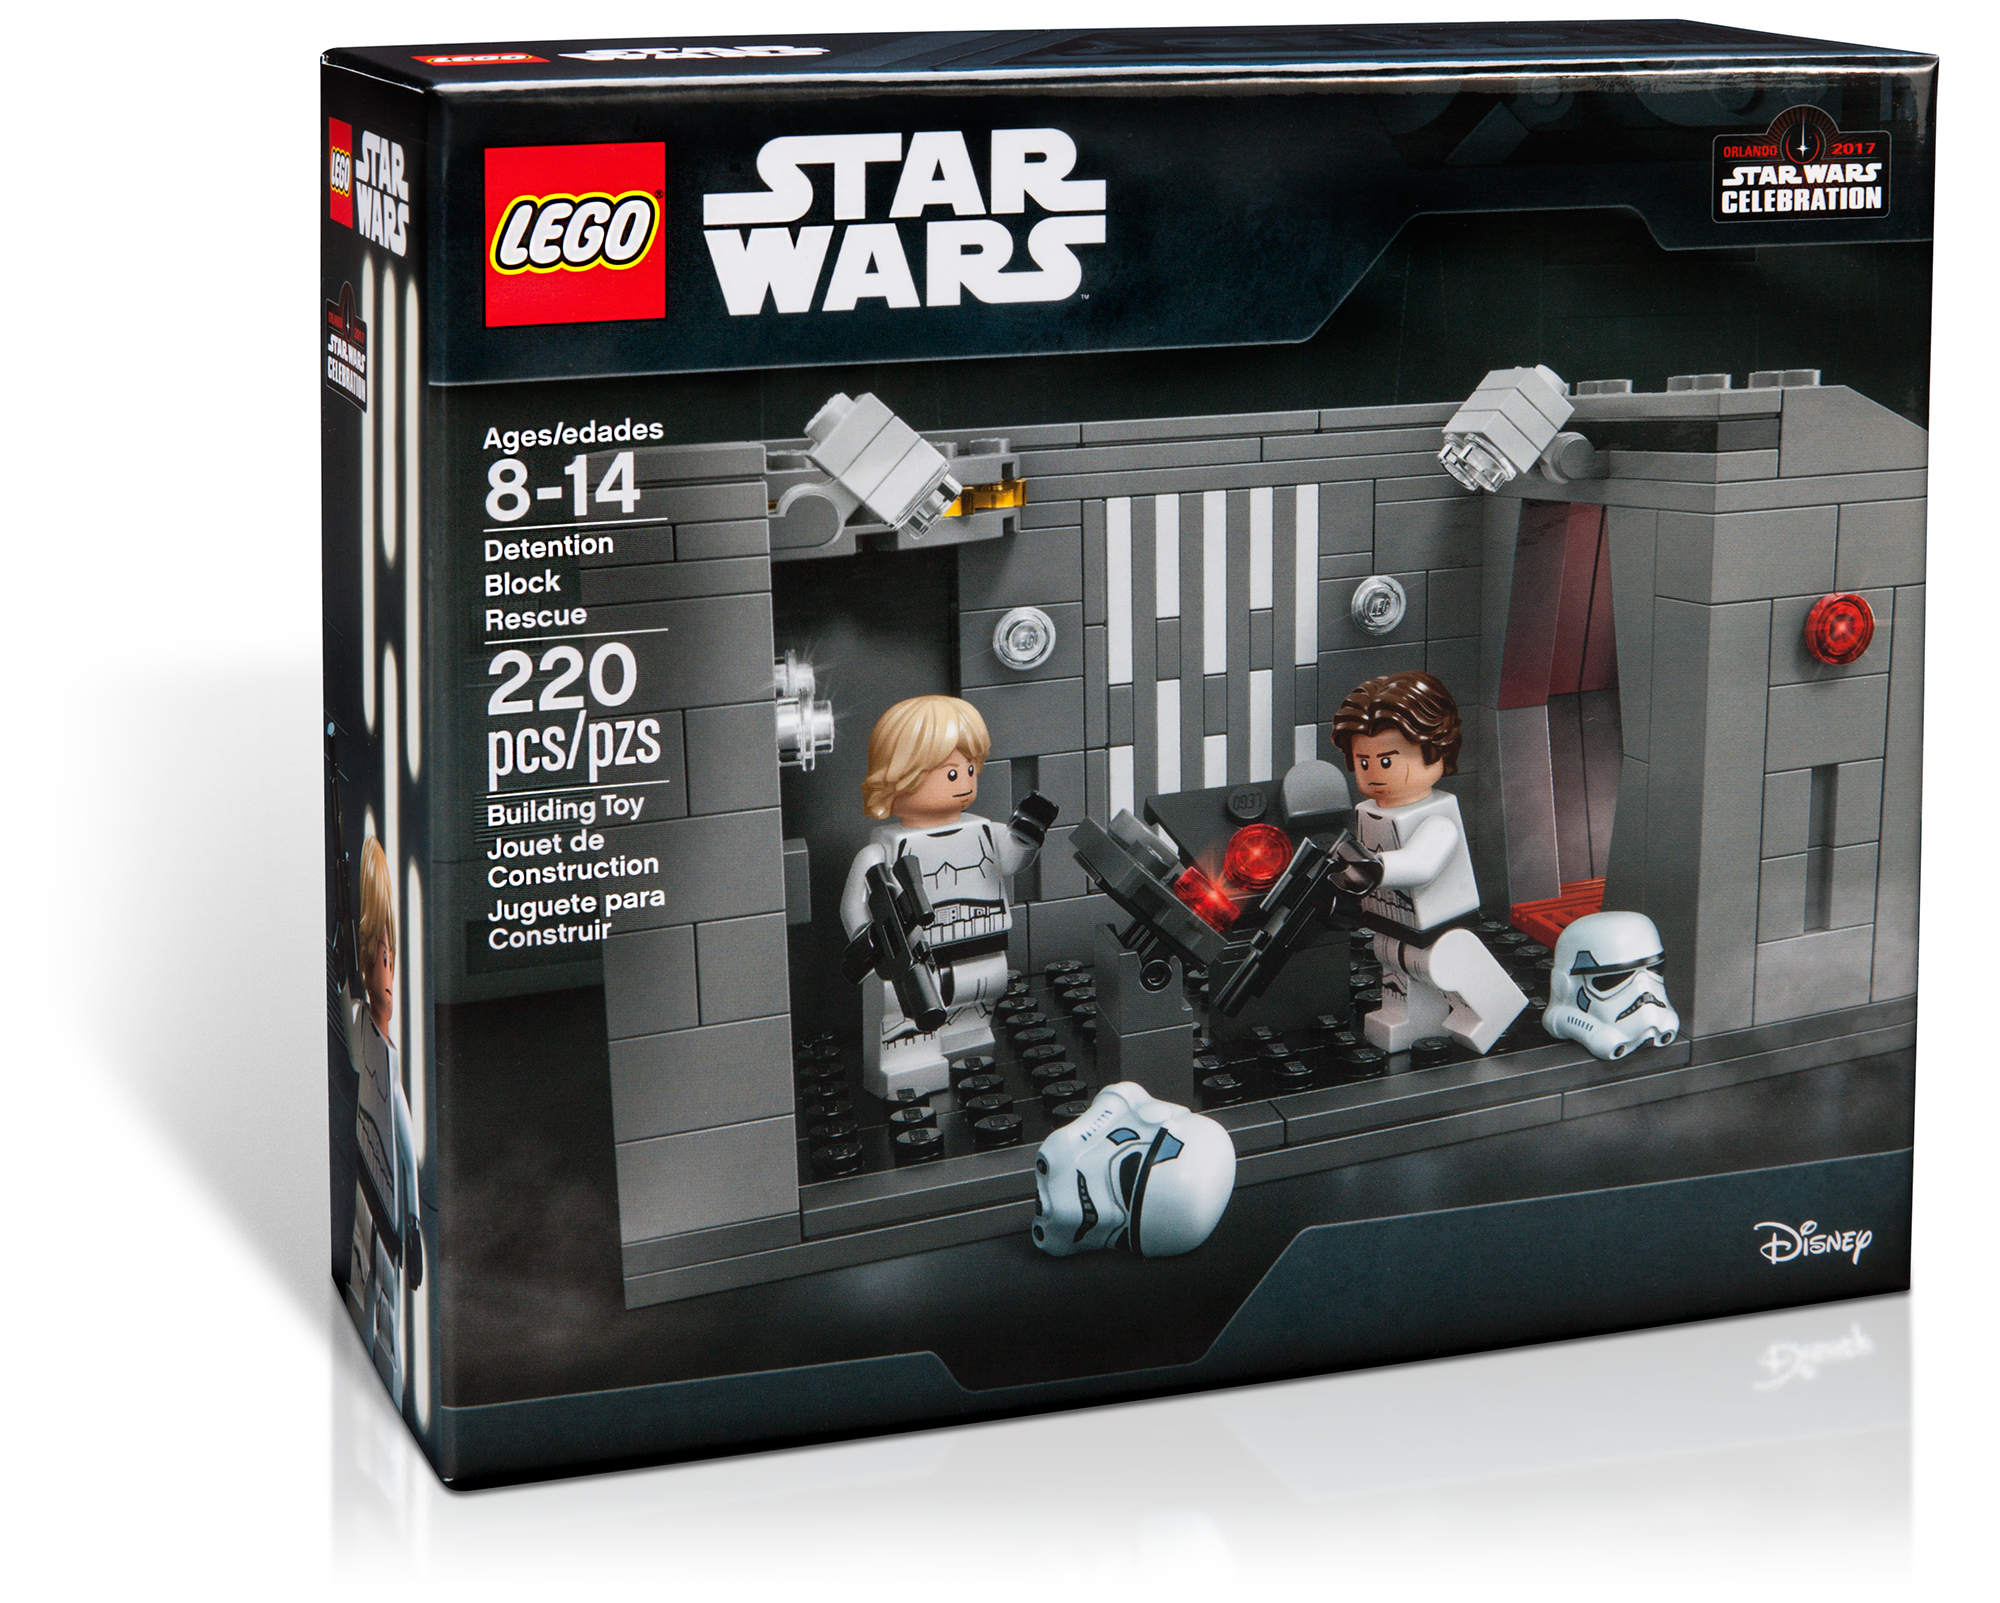 It’s Going To Be Incredibly Hard To Get LEGO’s Special Star Wars Celebration Set